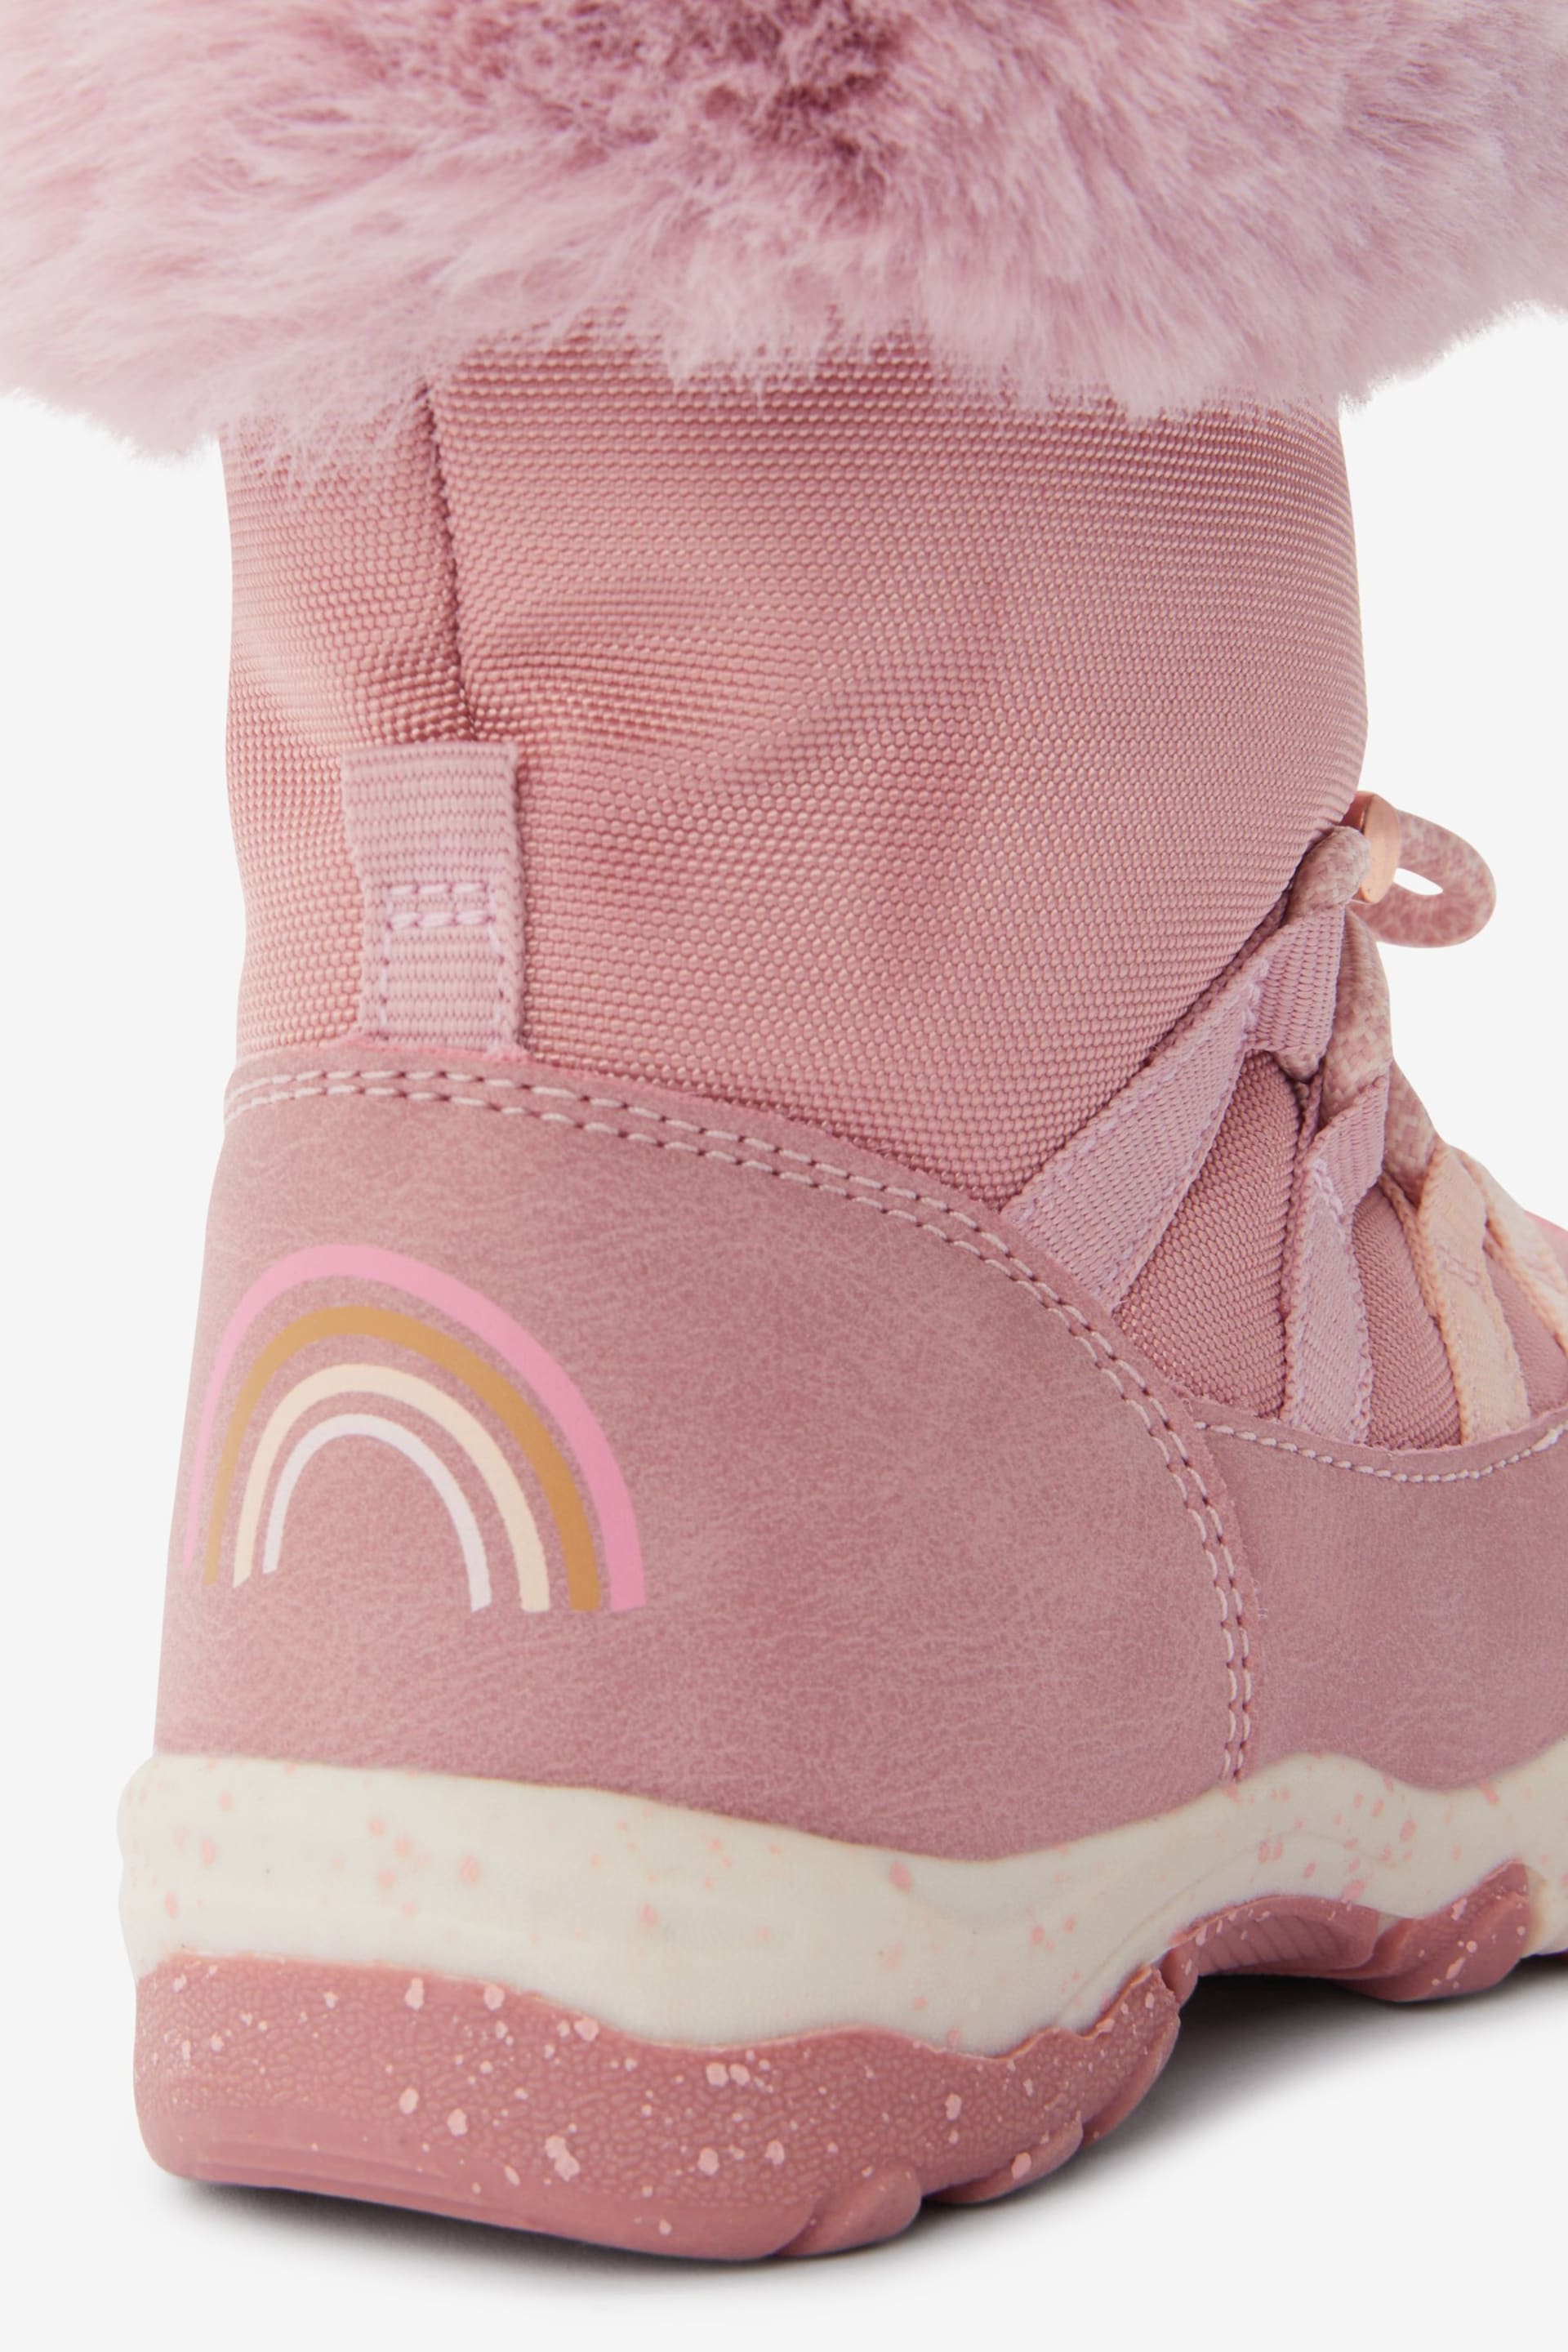 Pink Water Resistant Warm Lined Snow Boots - Image 4 of 5